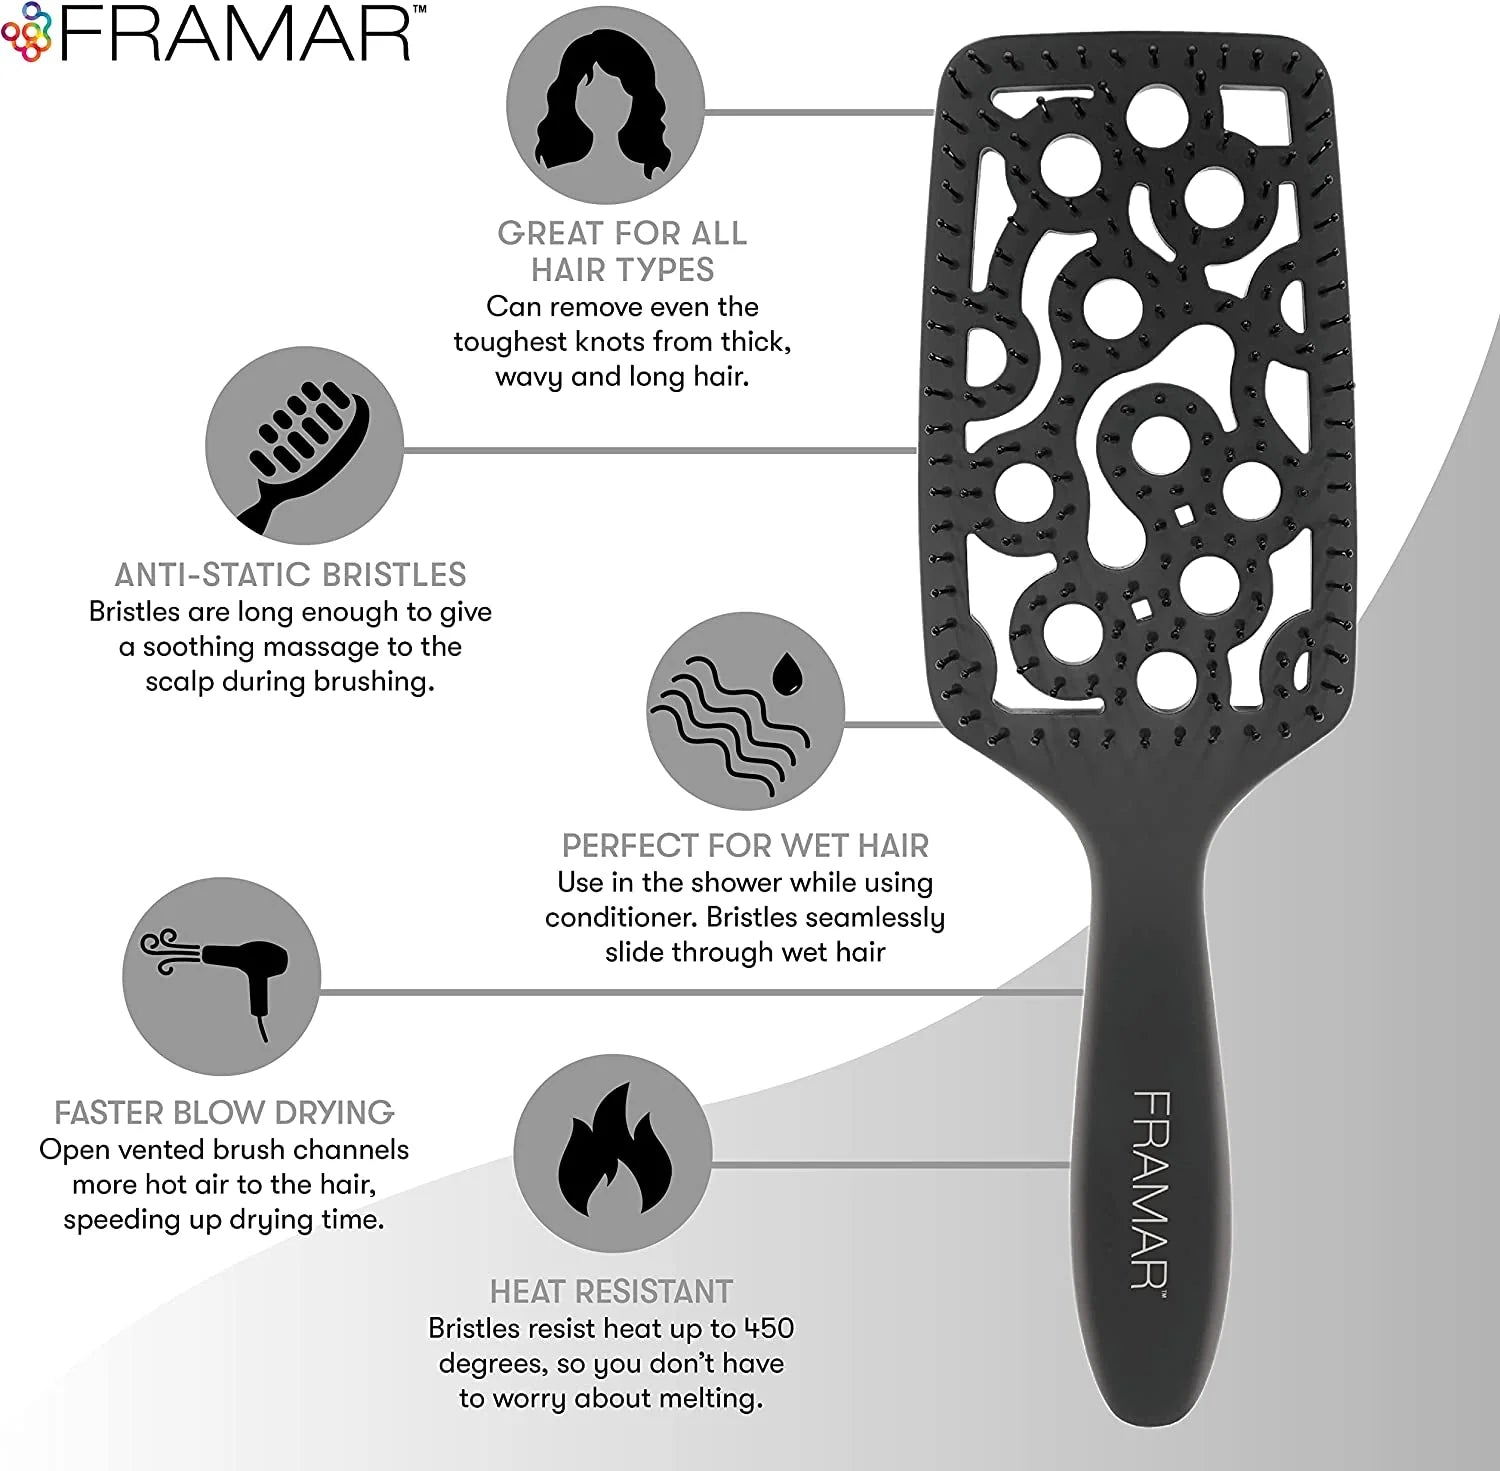 Framar - Air Vent Brush - I Need To Vent